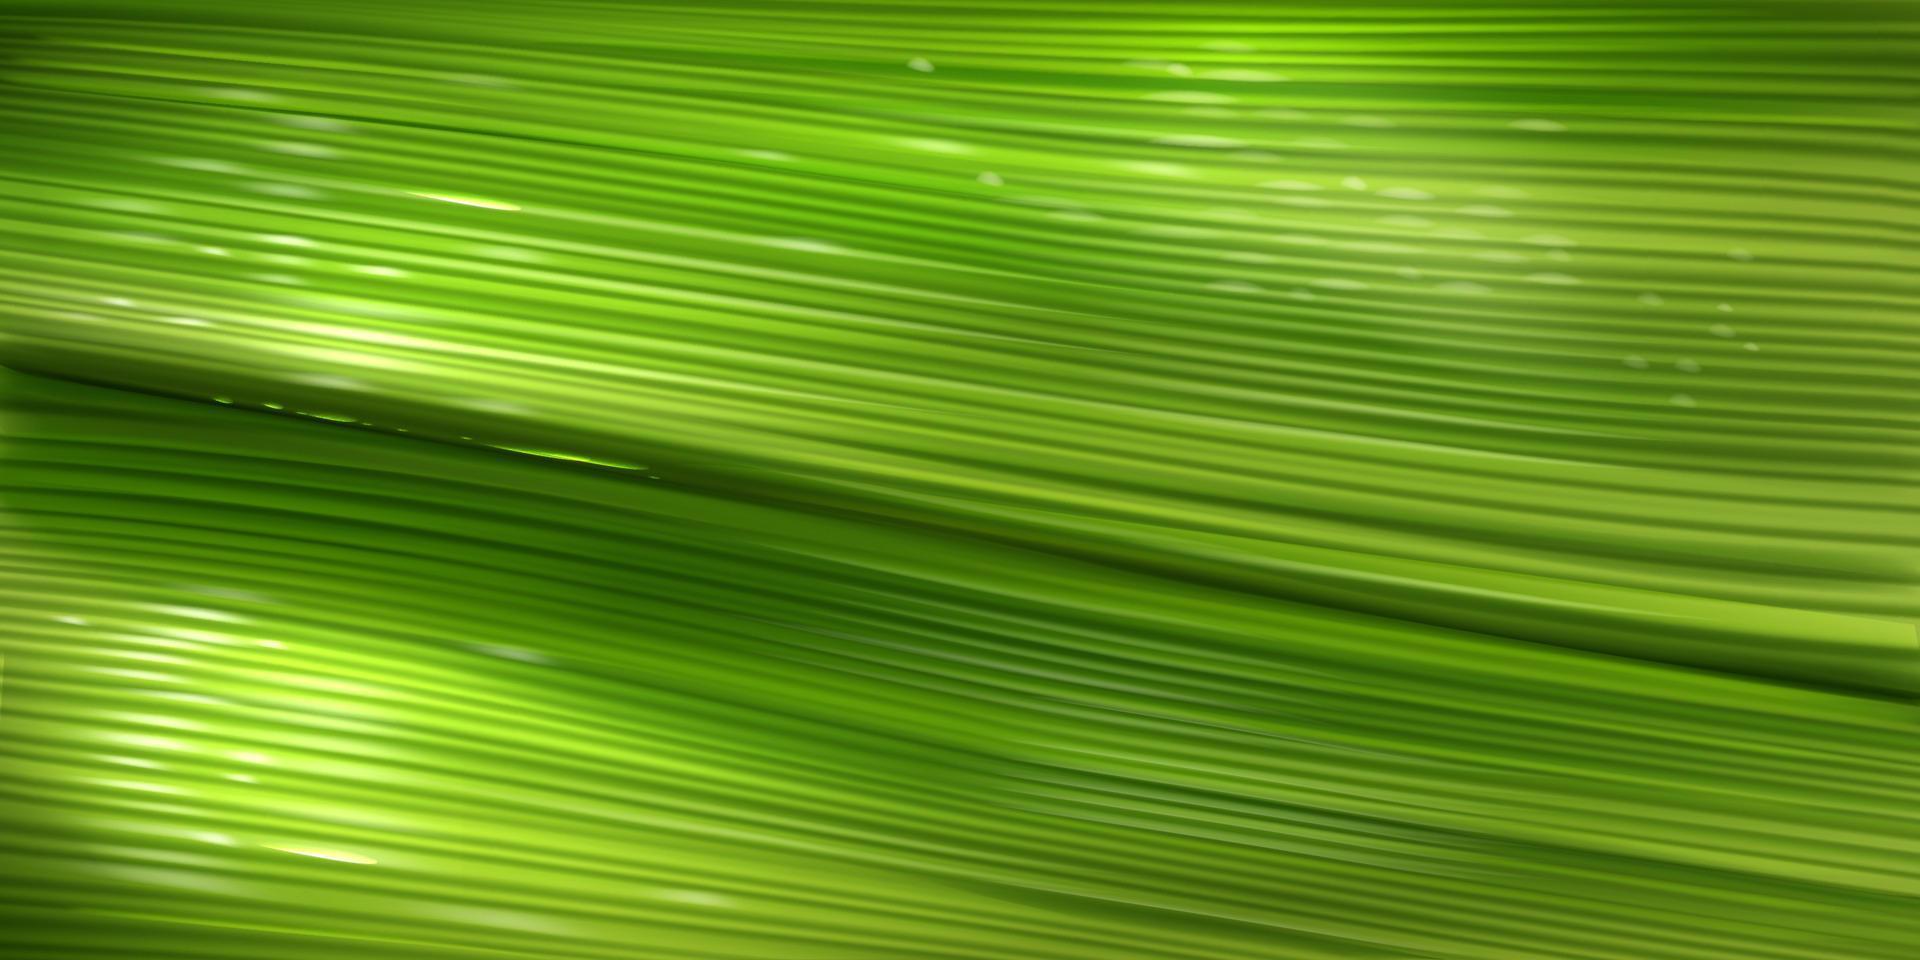 Banana leaf texture, surface of green palm leaf vector